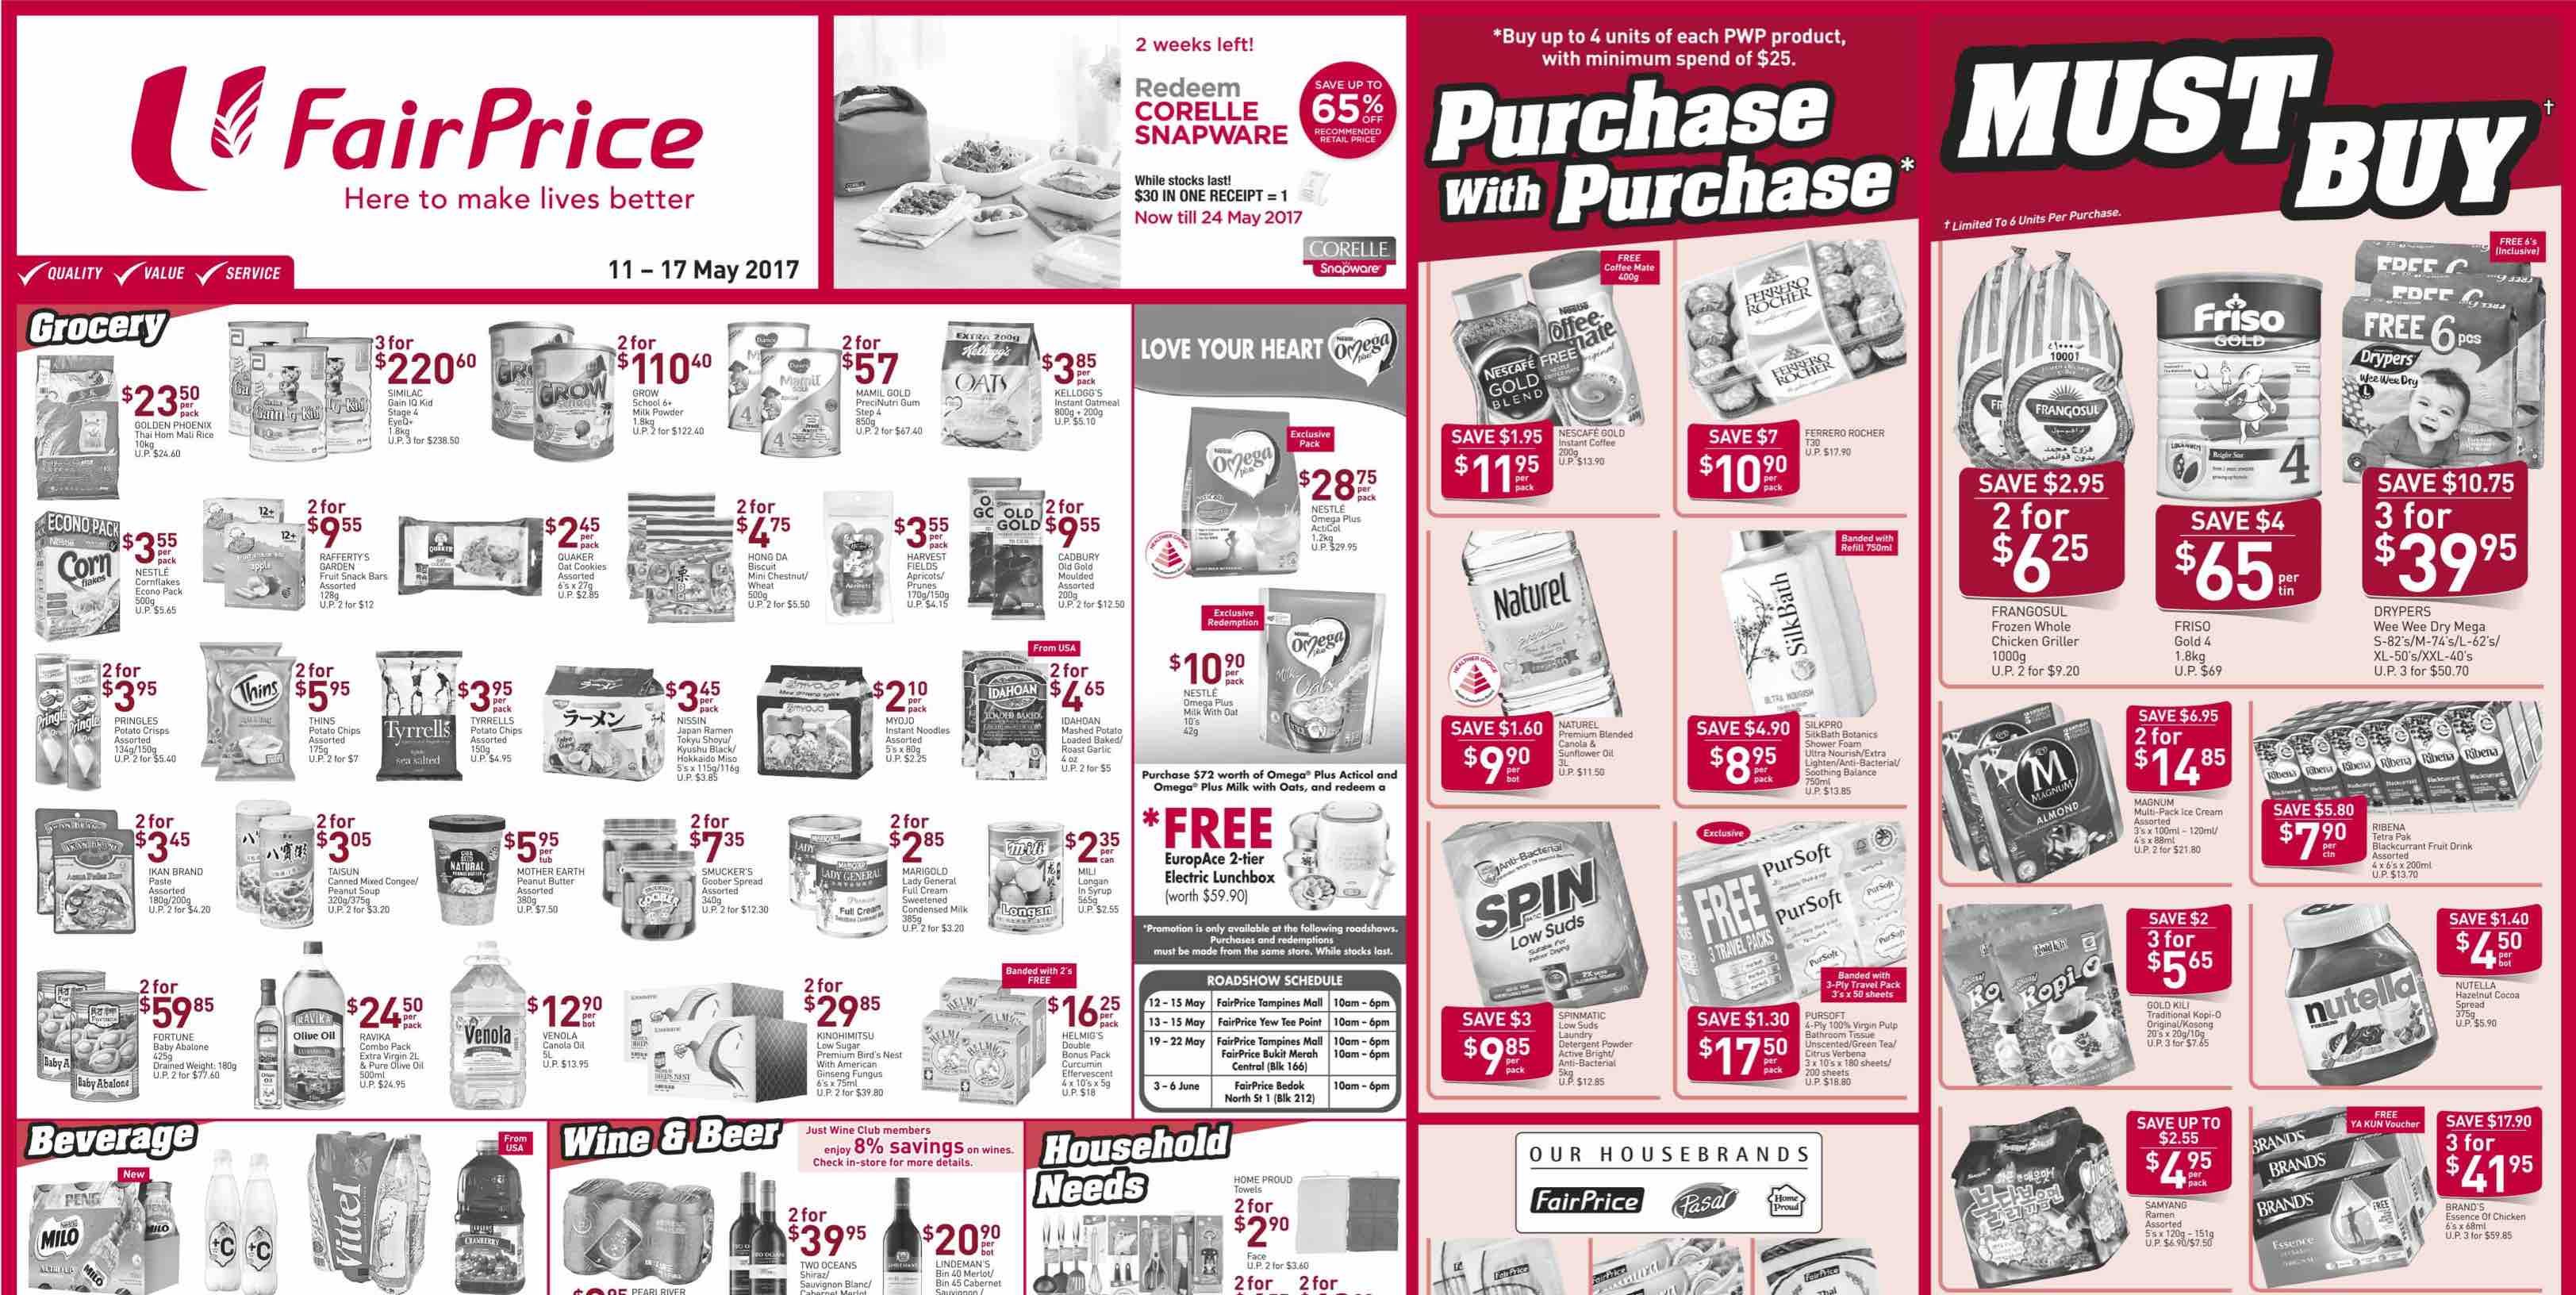 NTUC FairPrice Singapore Your Weekly Saver & Must Buy Promotions 11-17 May 2017